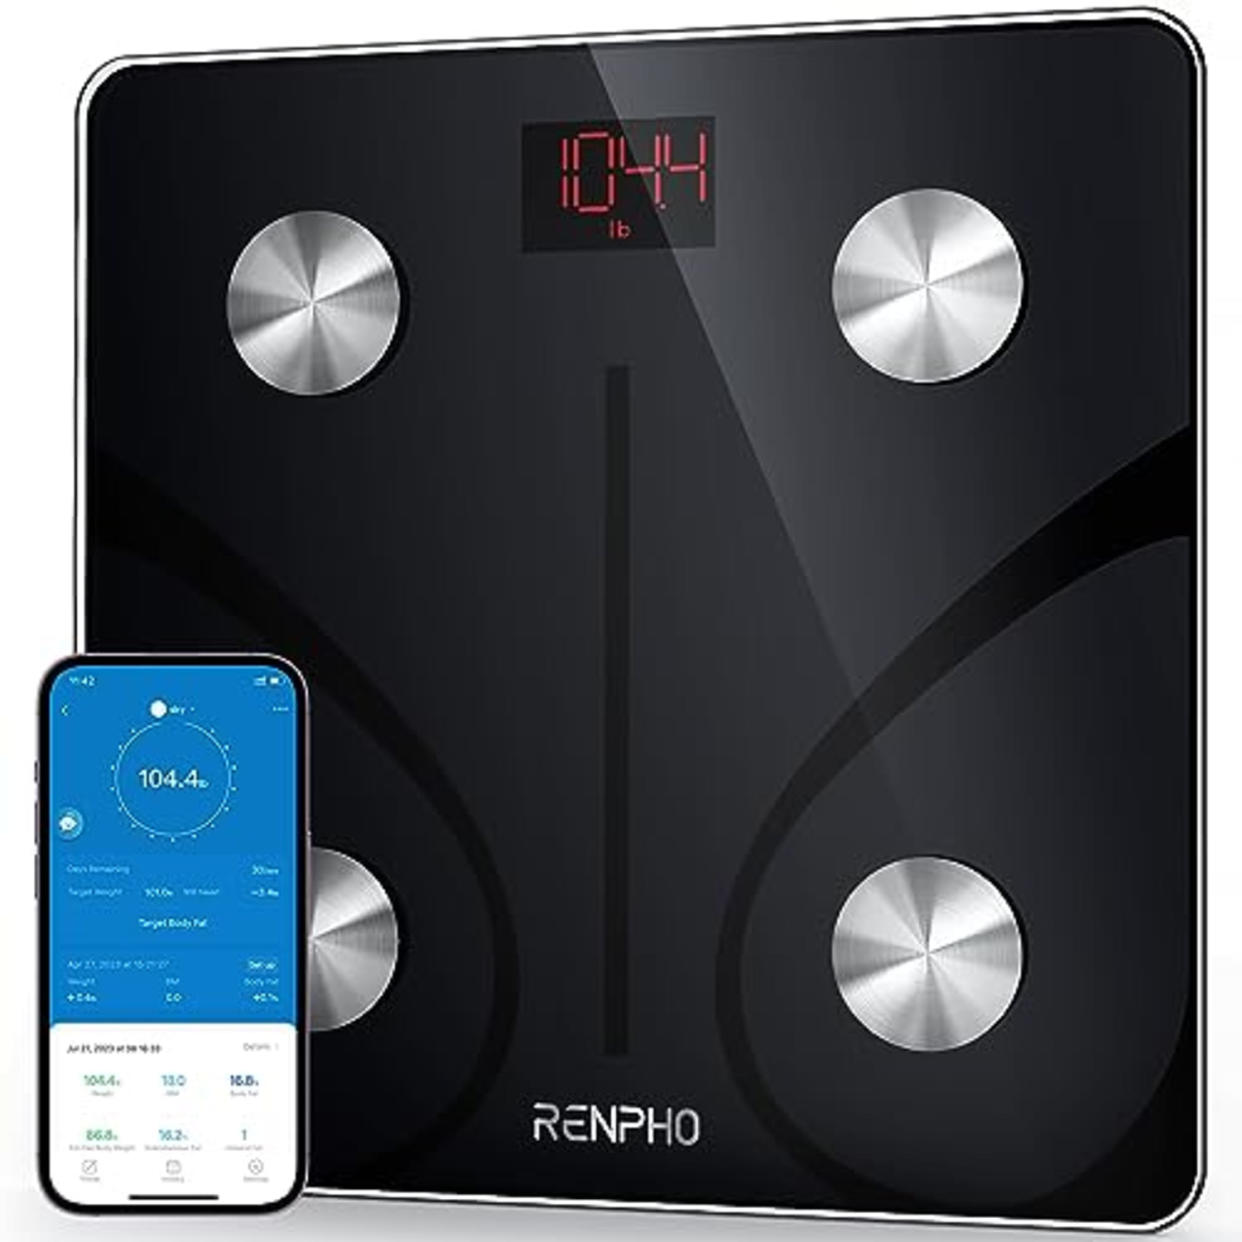 RENPHO Smart Scale for Body Weight, Digital Bathroom Scale BMI Weighing Bluetooth Body Fat Scale, Body Composition Monitor Health Analyzer with Smartphone App, 400 lbs - Black Elis 1 (AMAZON)